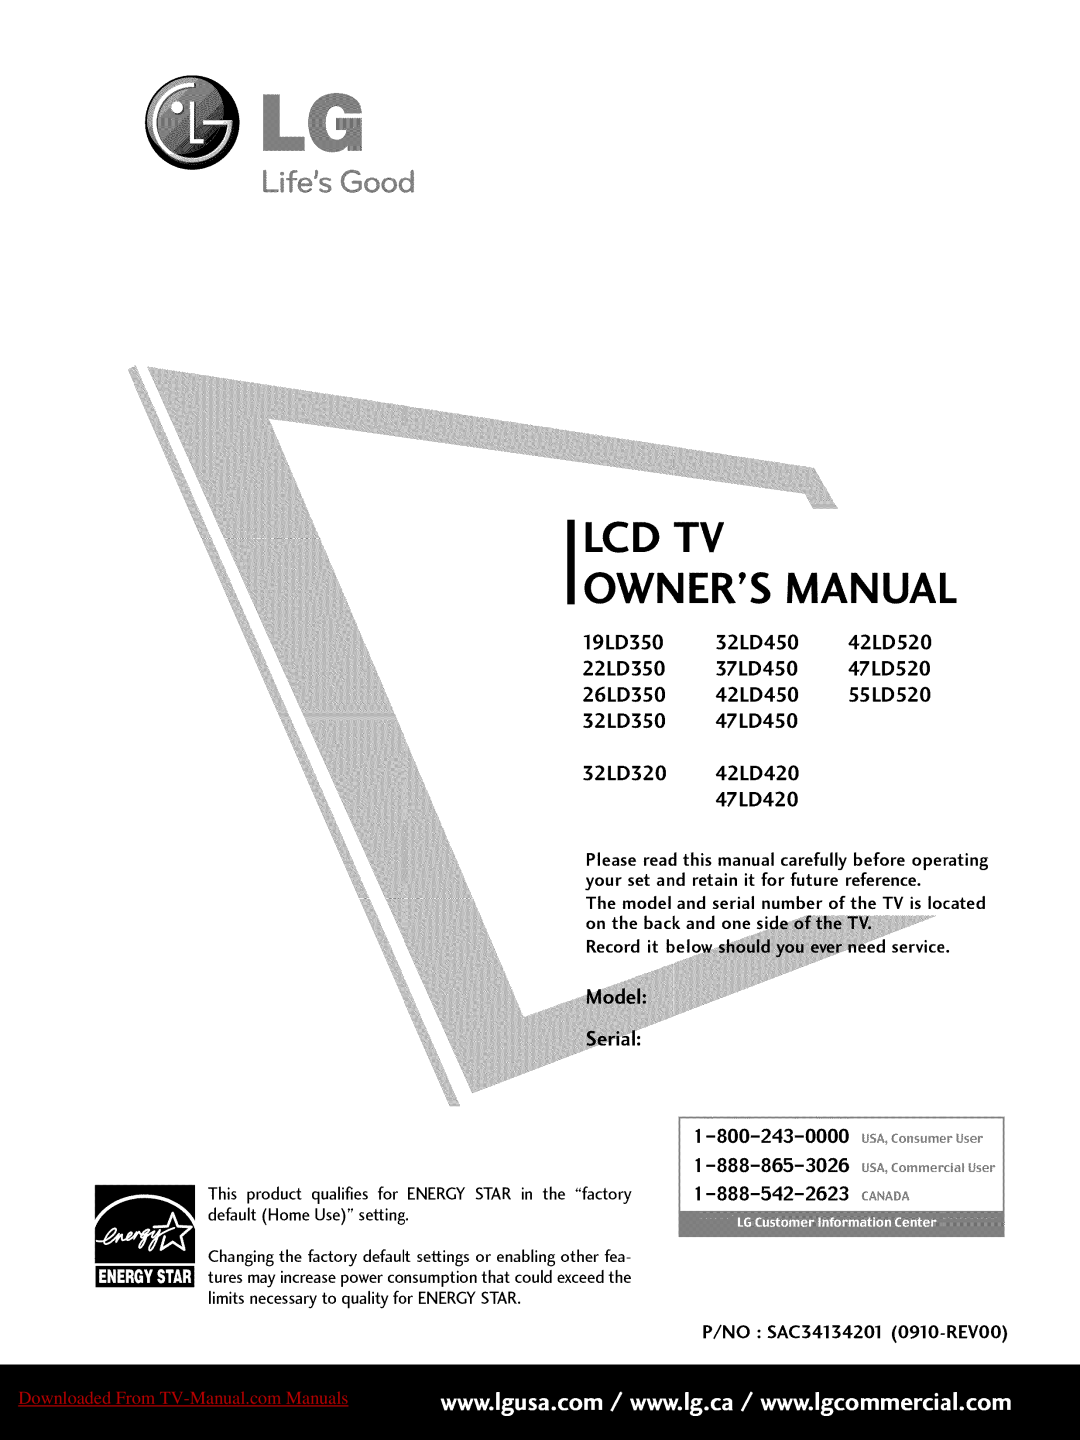 LG Electronics 47LD450 owner manual Lcd Tv Owners Manual, Lifds Good, Downloaded From TV-Manual.com Manuals, 19LD350 